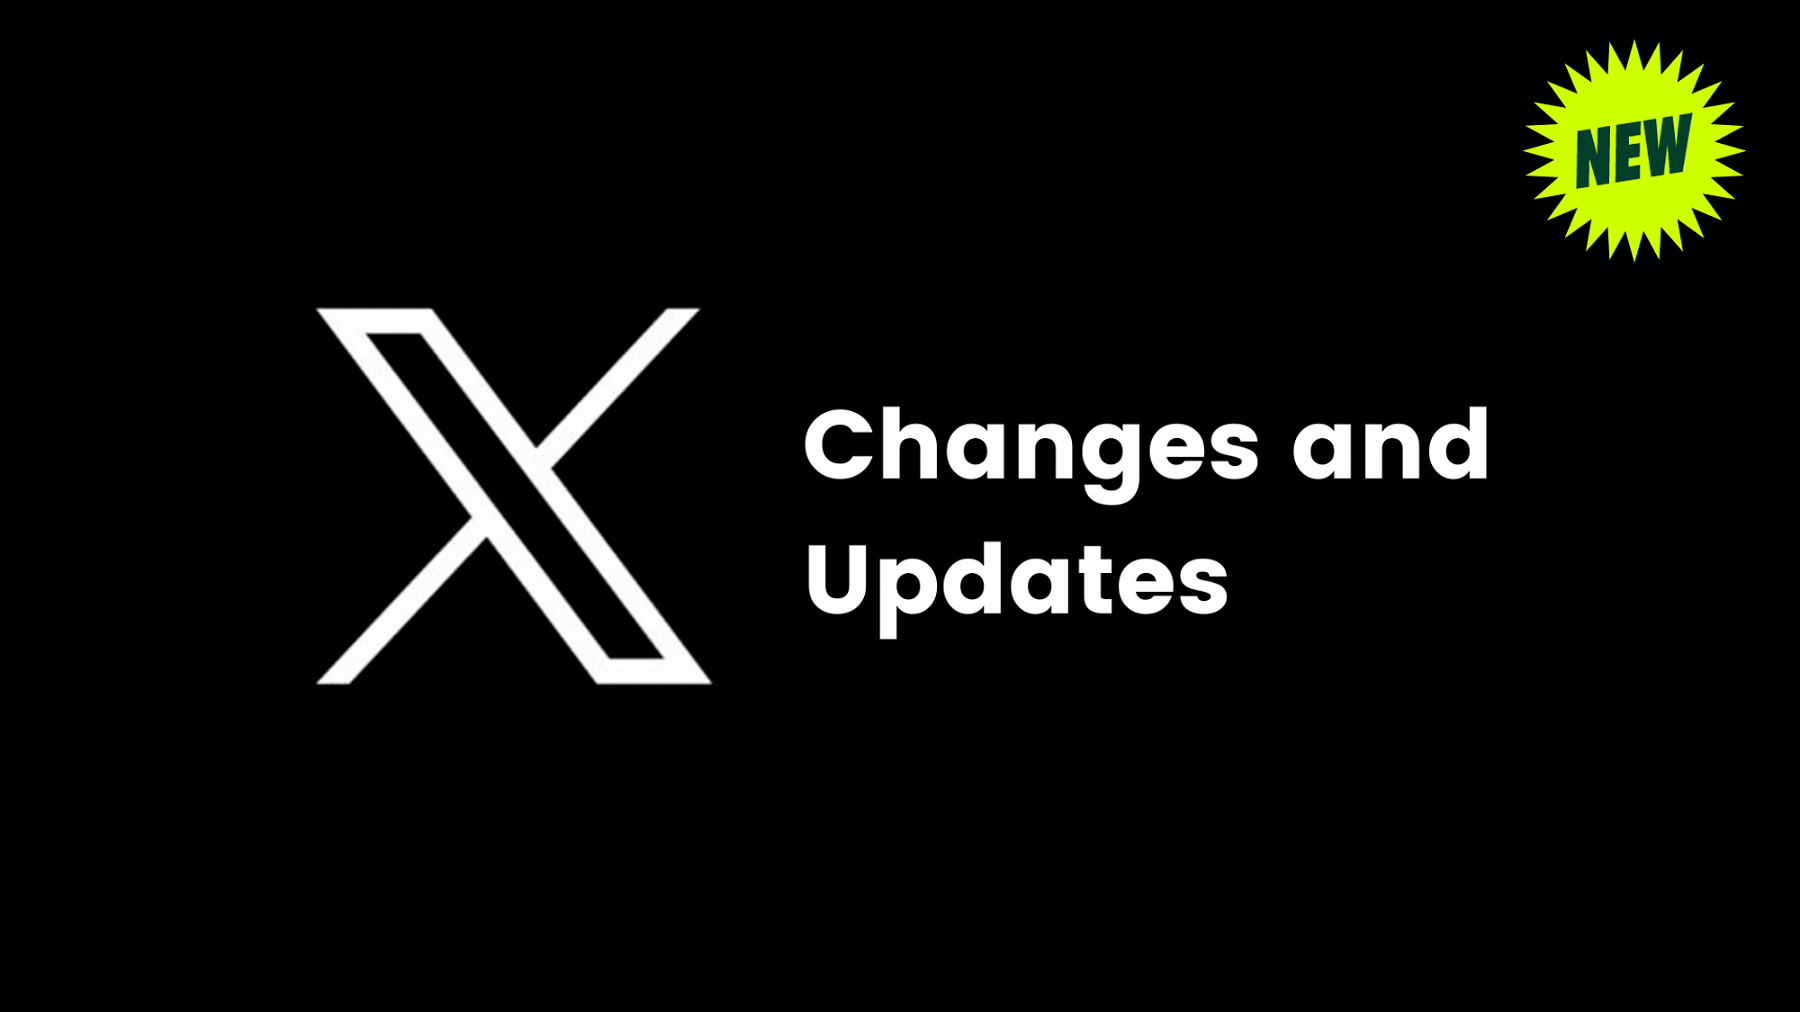 Latest X algorithm changes and updates